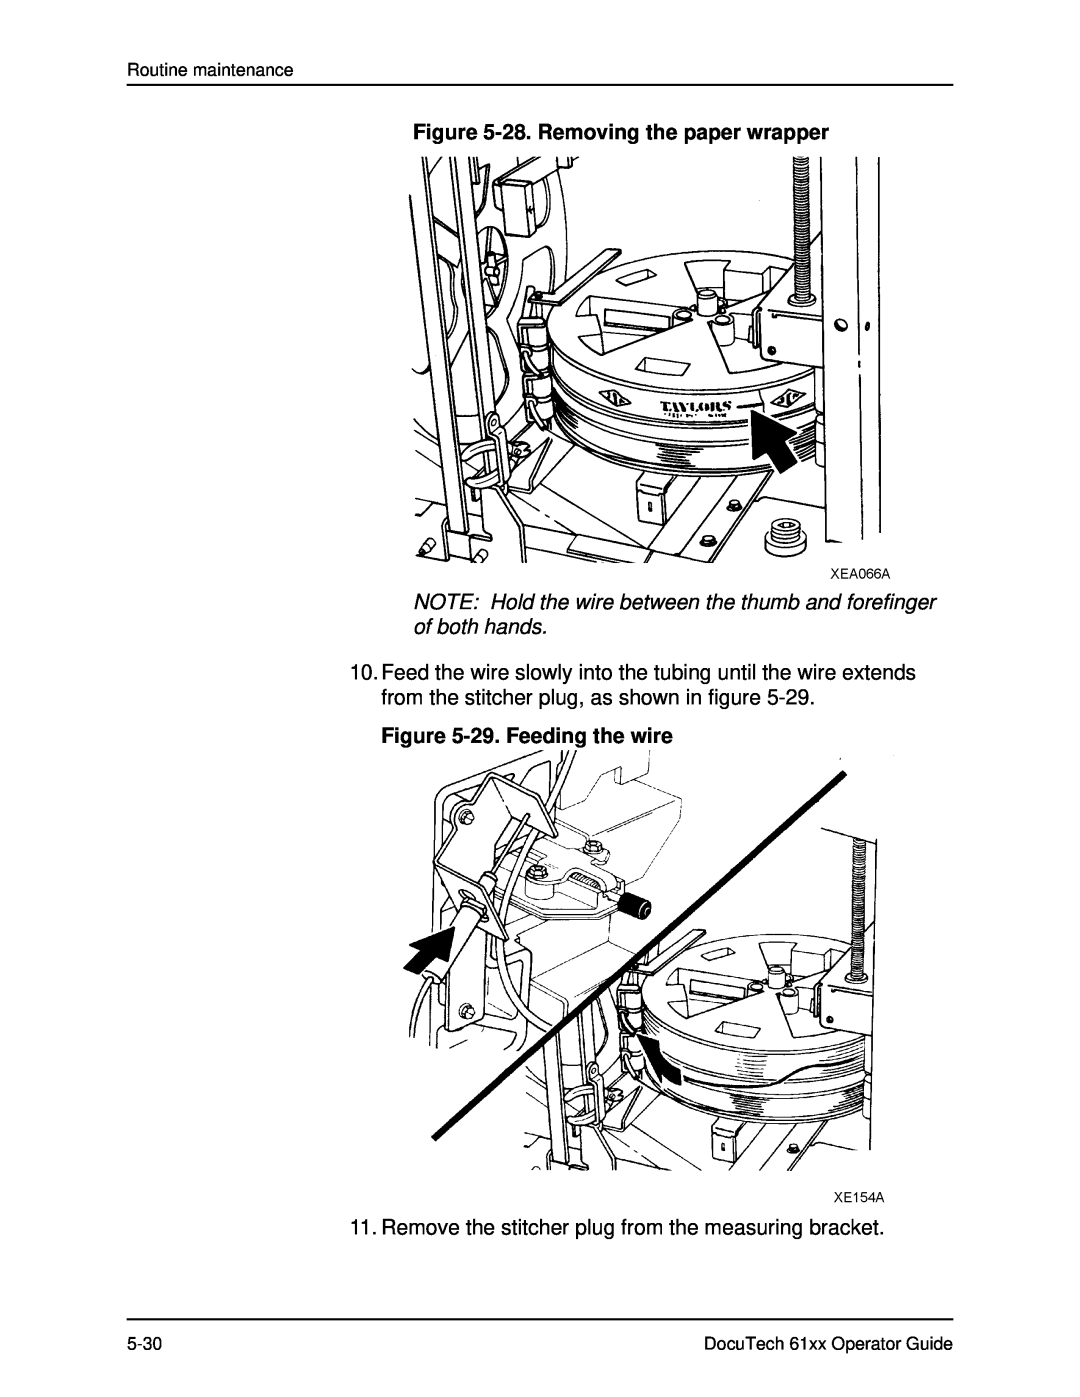 Xerox 61xx manual 28. Removing the paper wrapper, NOTE Hold the wire between the thumb and forefinger of both hands 